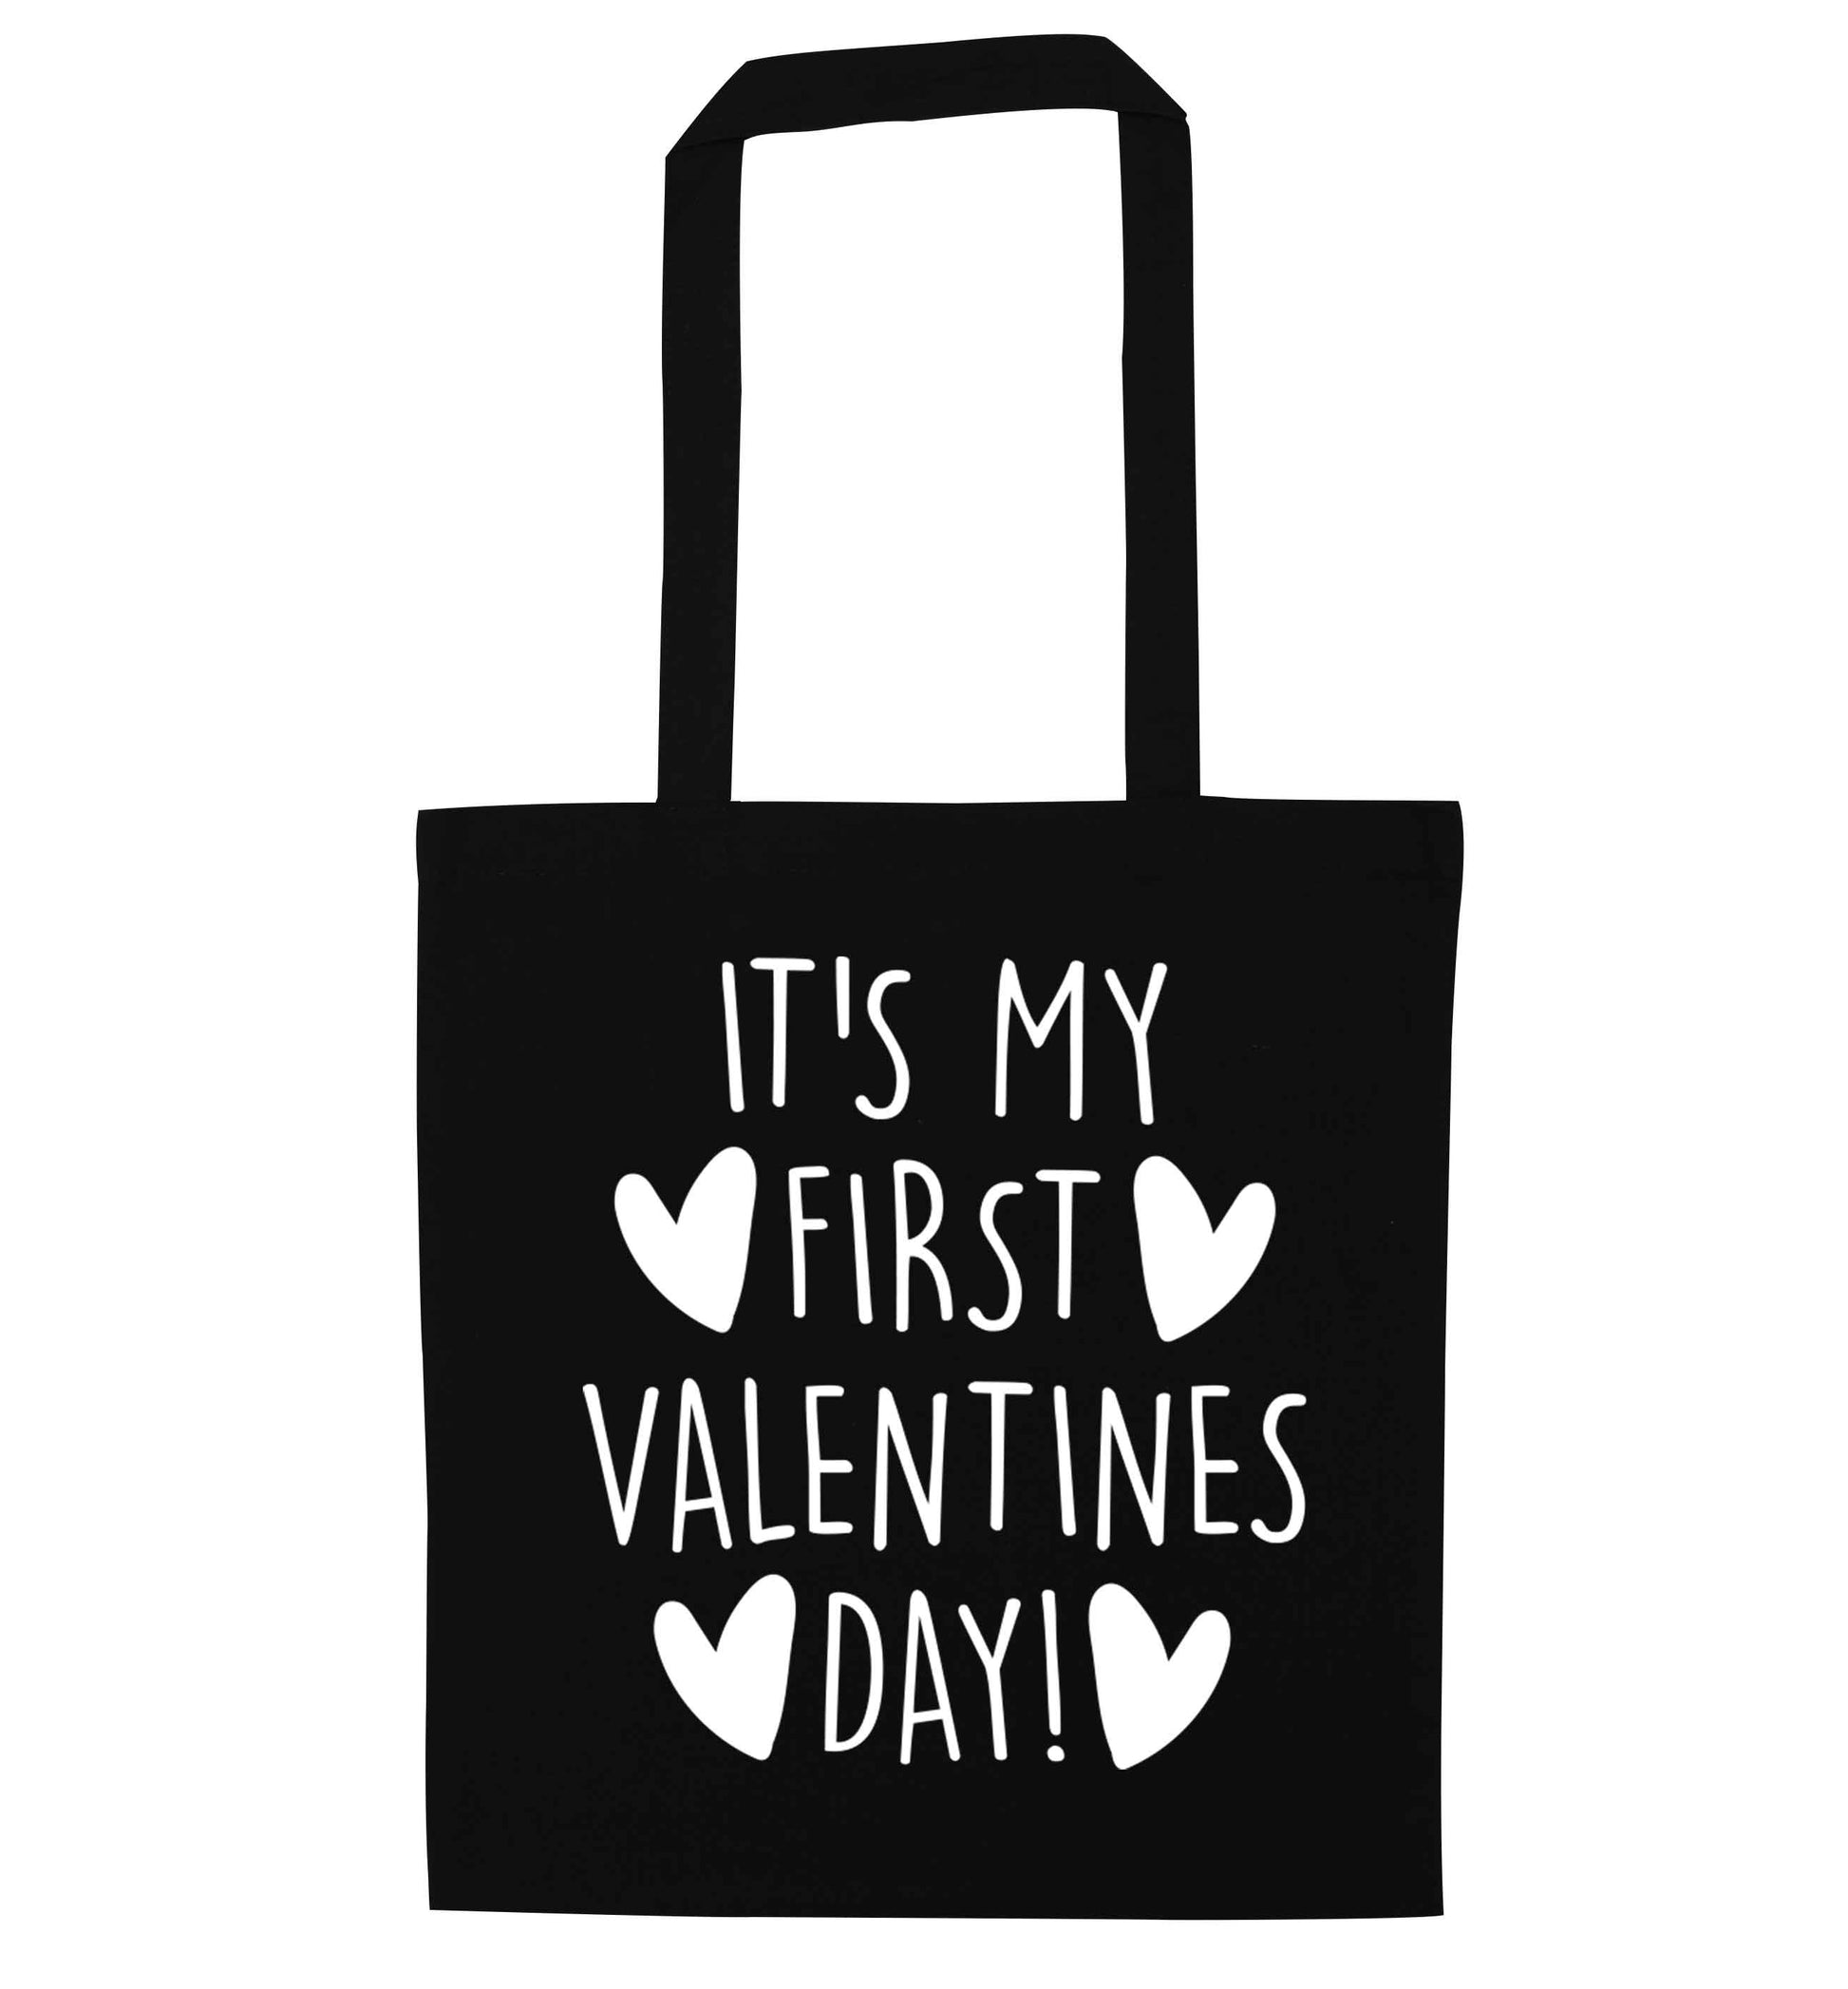 It's my first valentines day! black tote bag